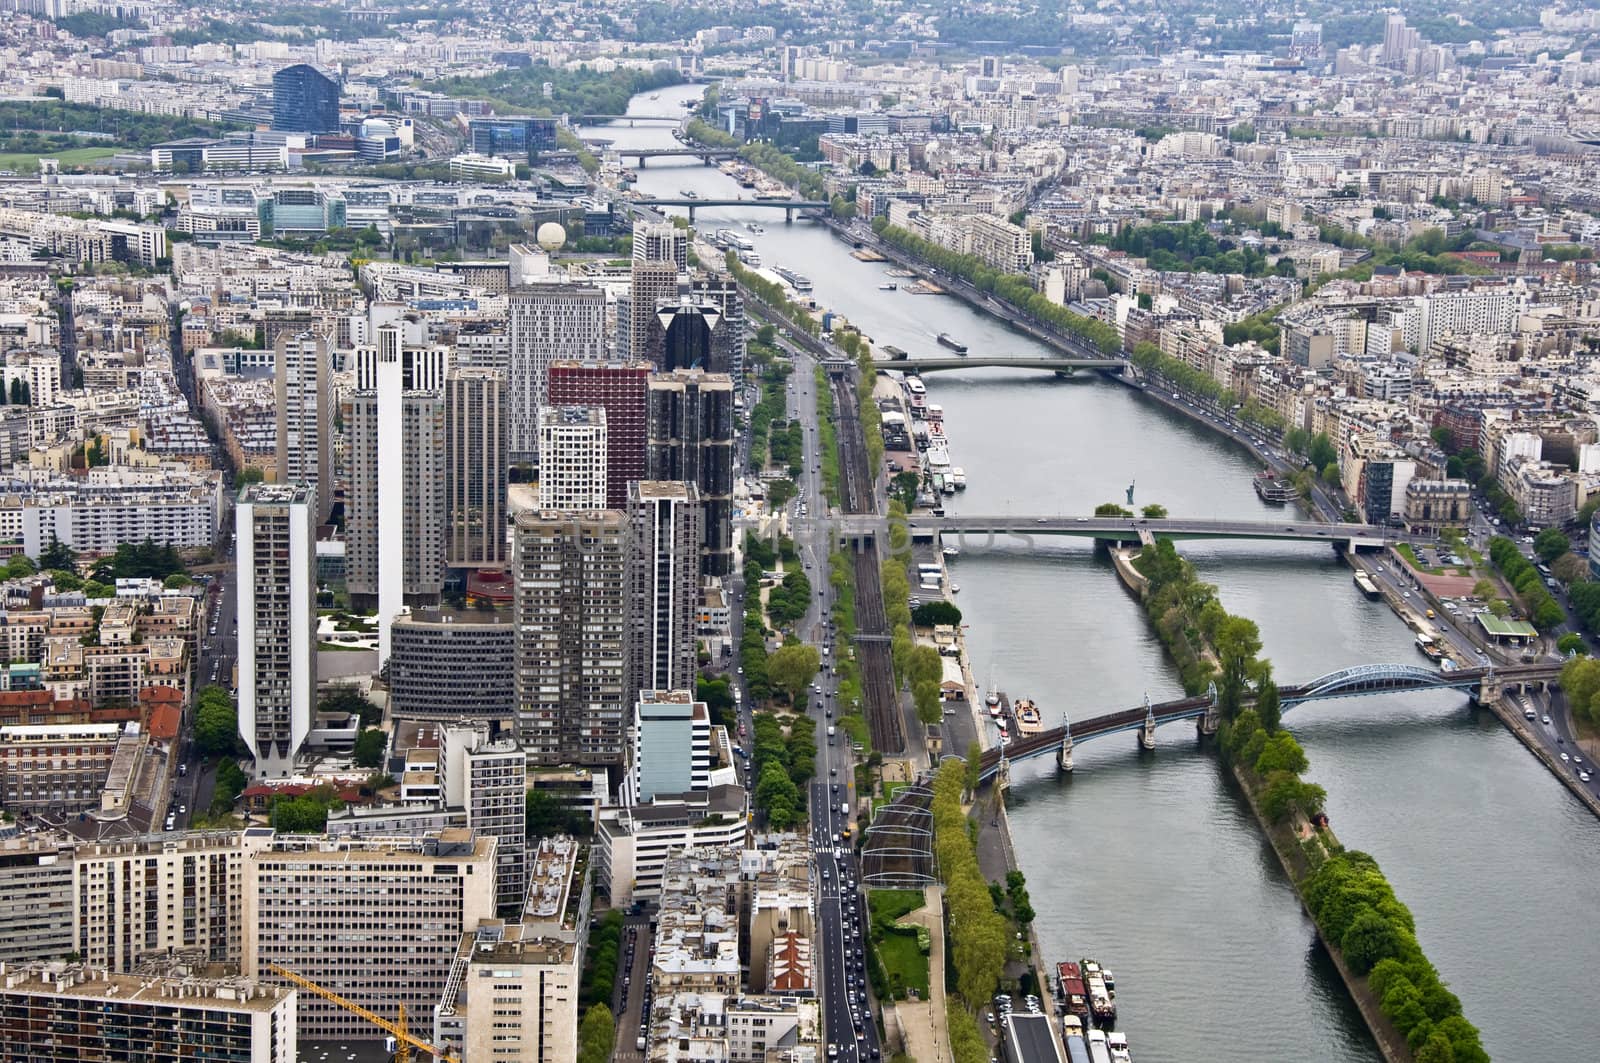 Center of Paris from the heights. View from the Eiffel Tower on the river Seine. Modern architecture.